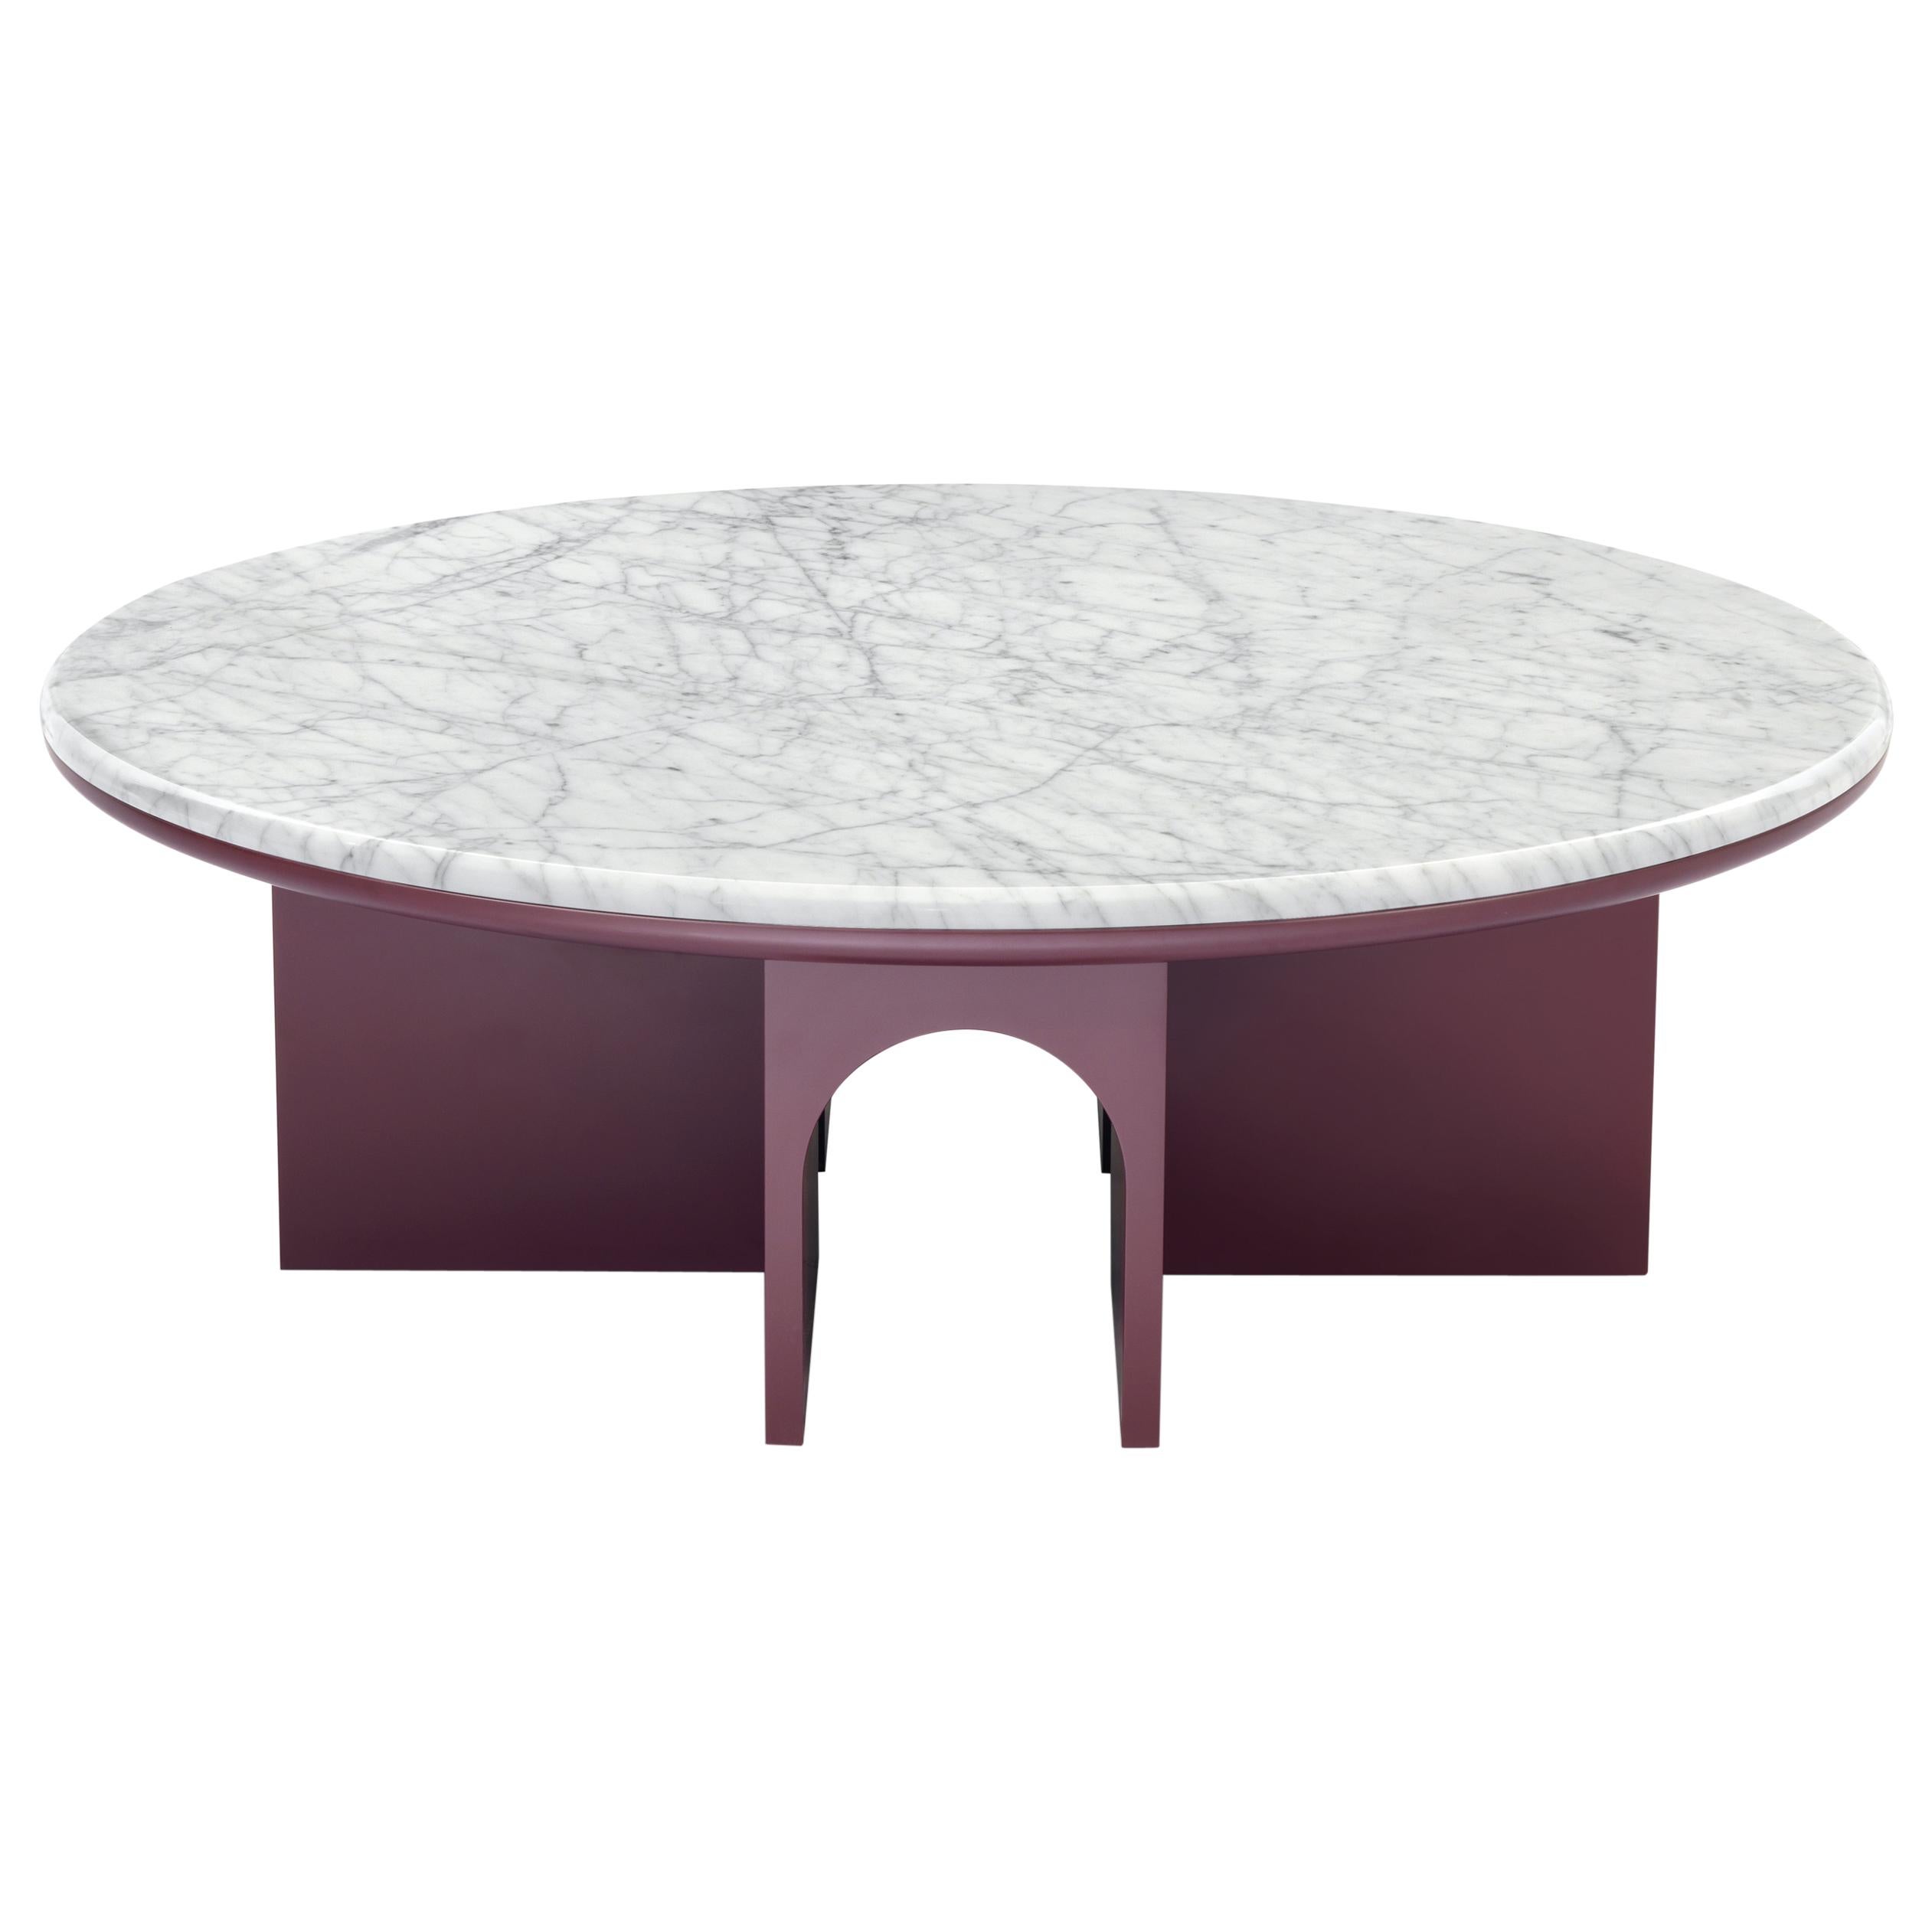 Arflex Arcolor 100cm Small Table in White Carrara Marble Top by Jaime Hayon For Sale